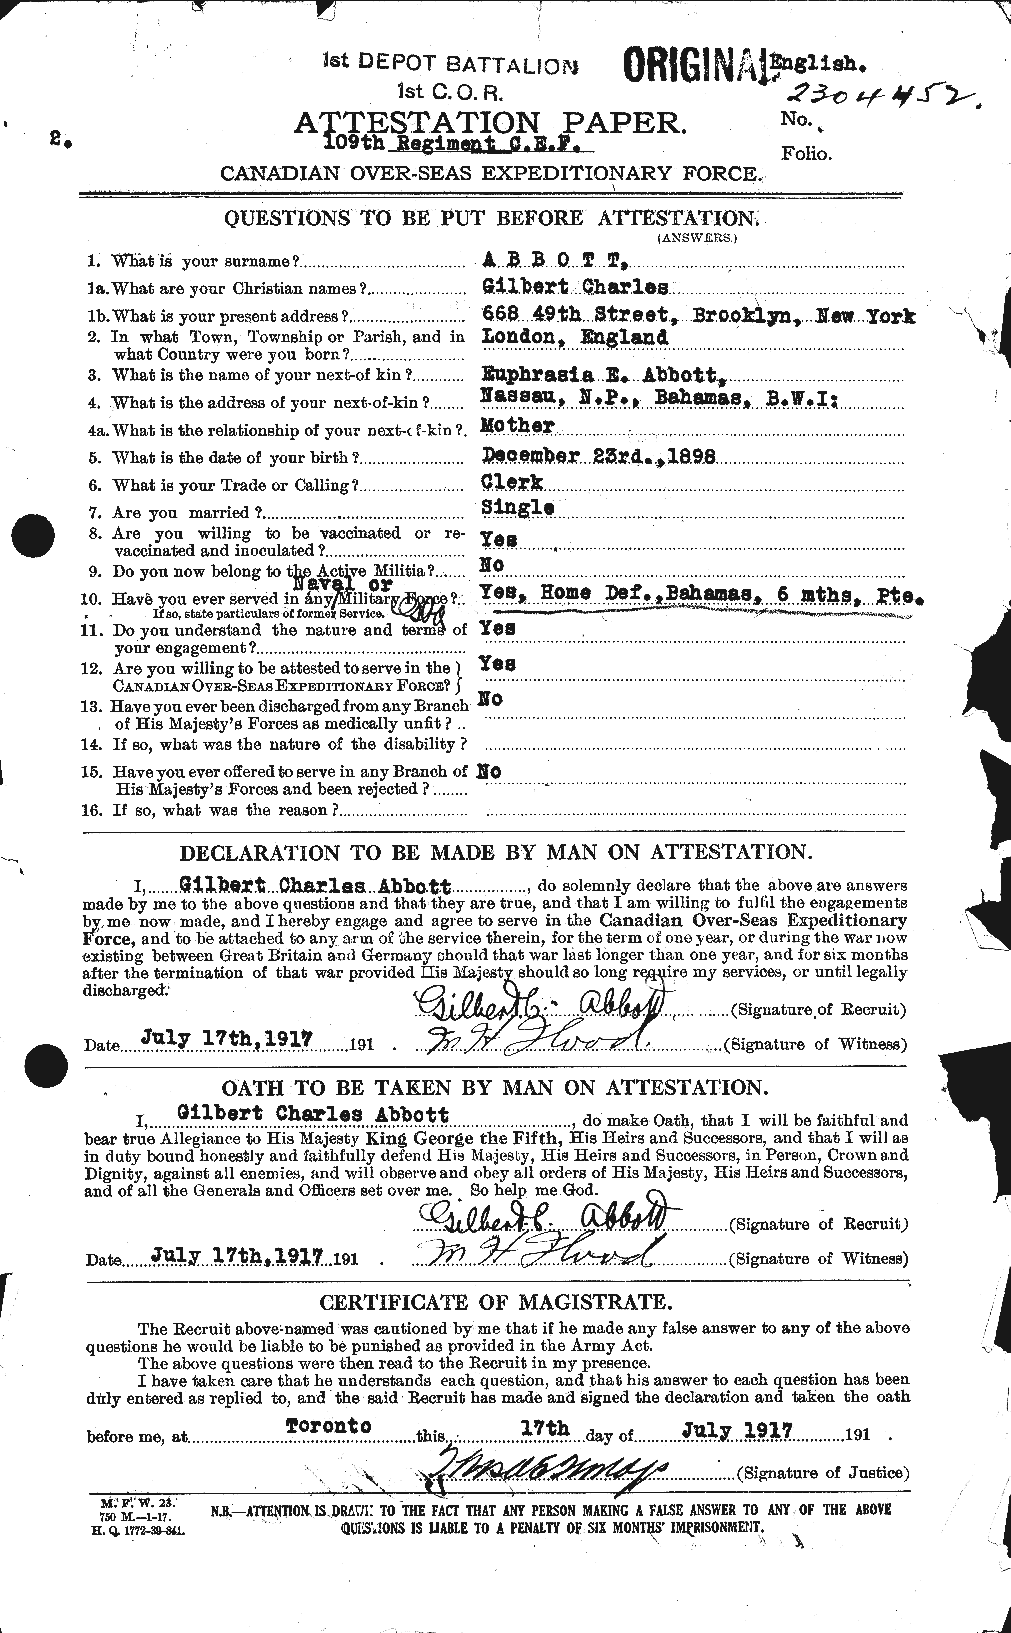 Personnel Records of the First World War - CEF 200949a